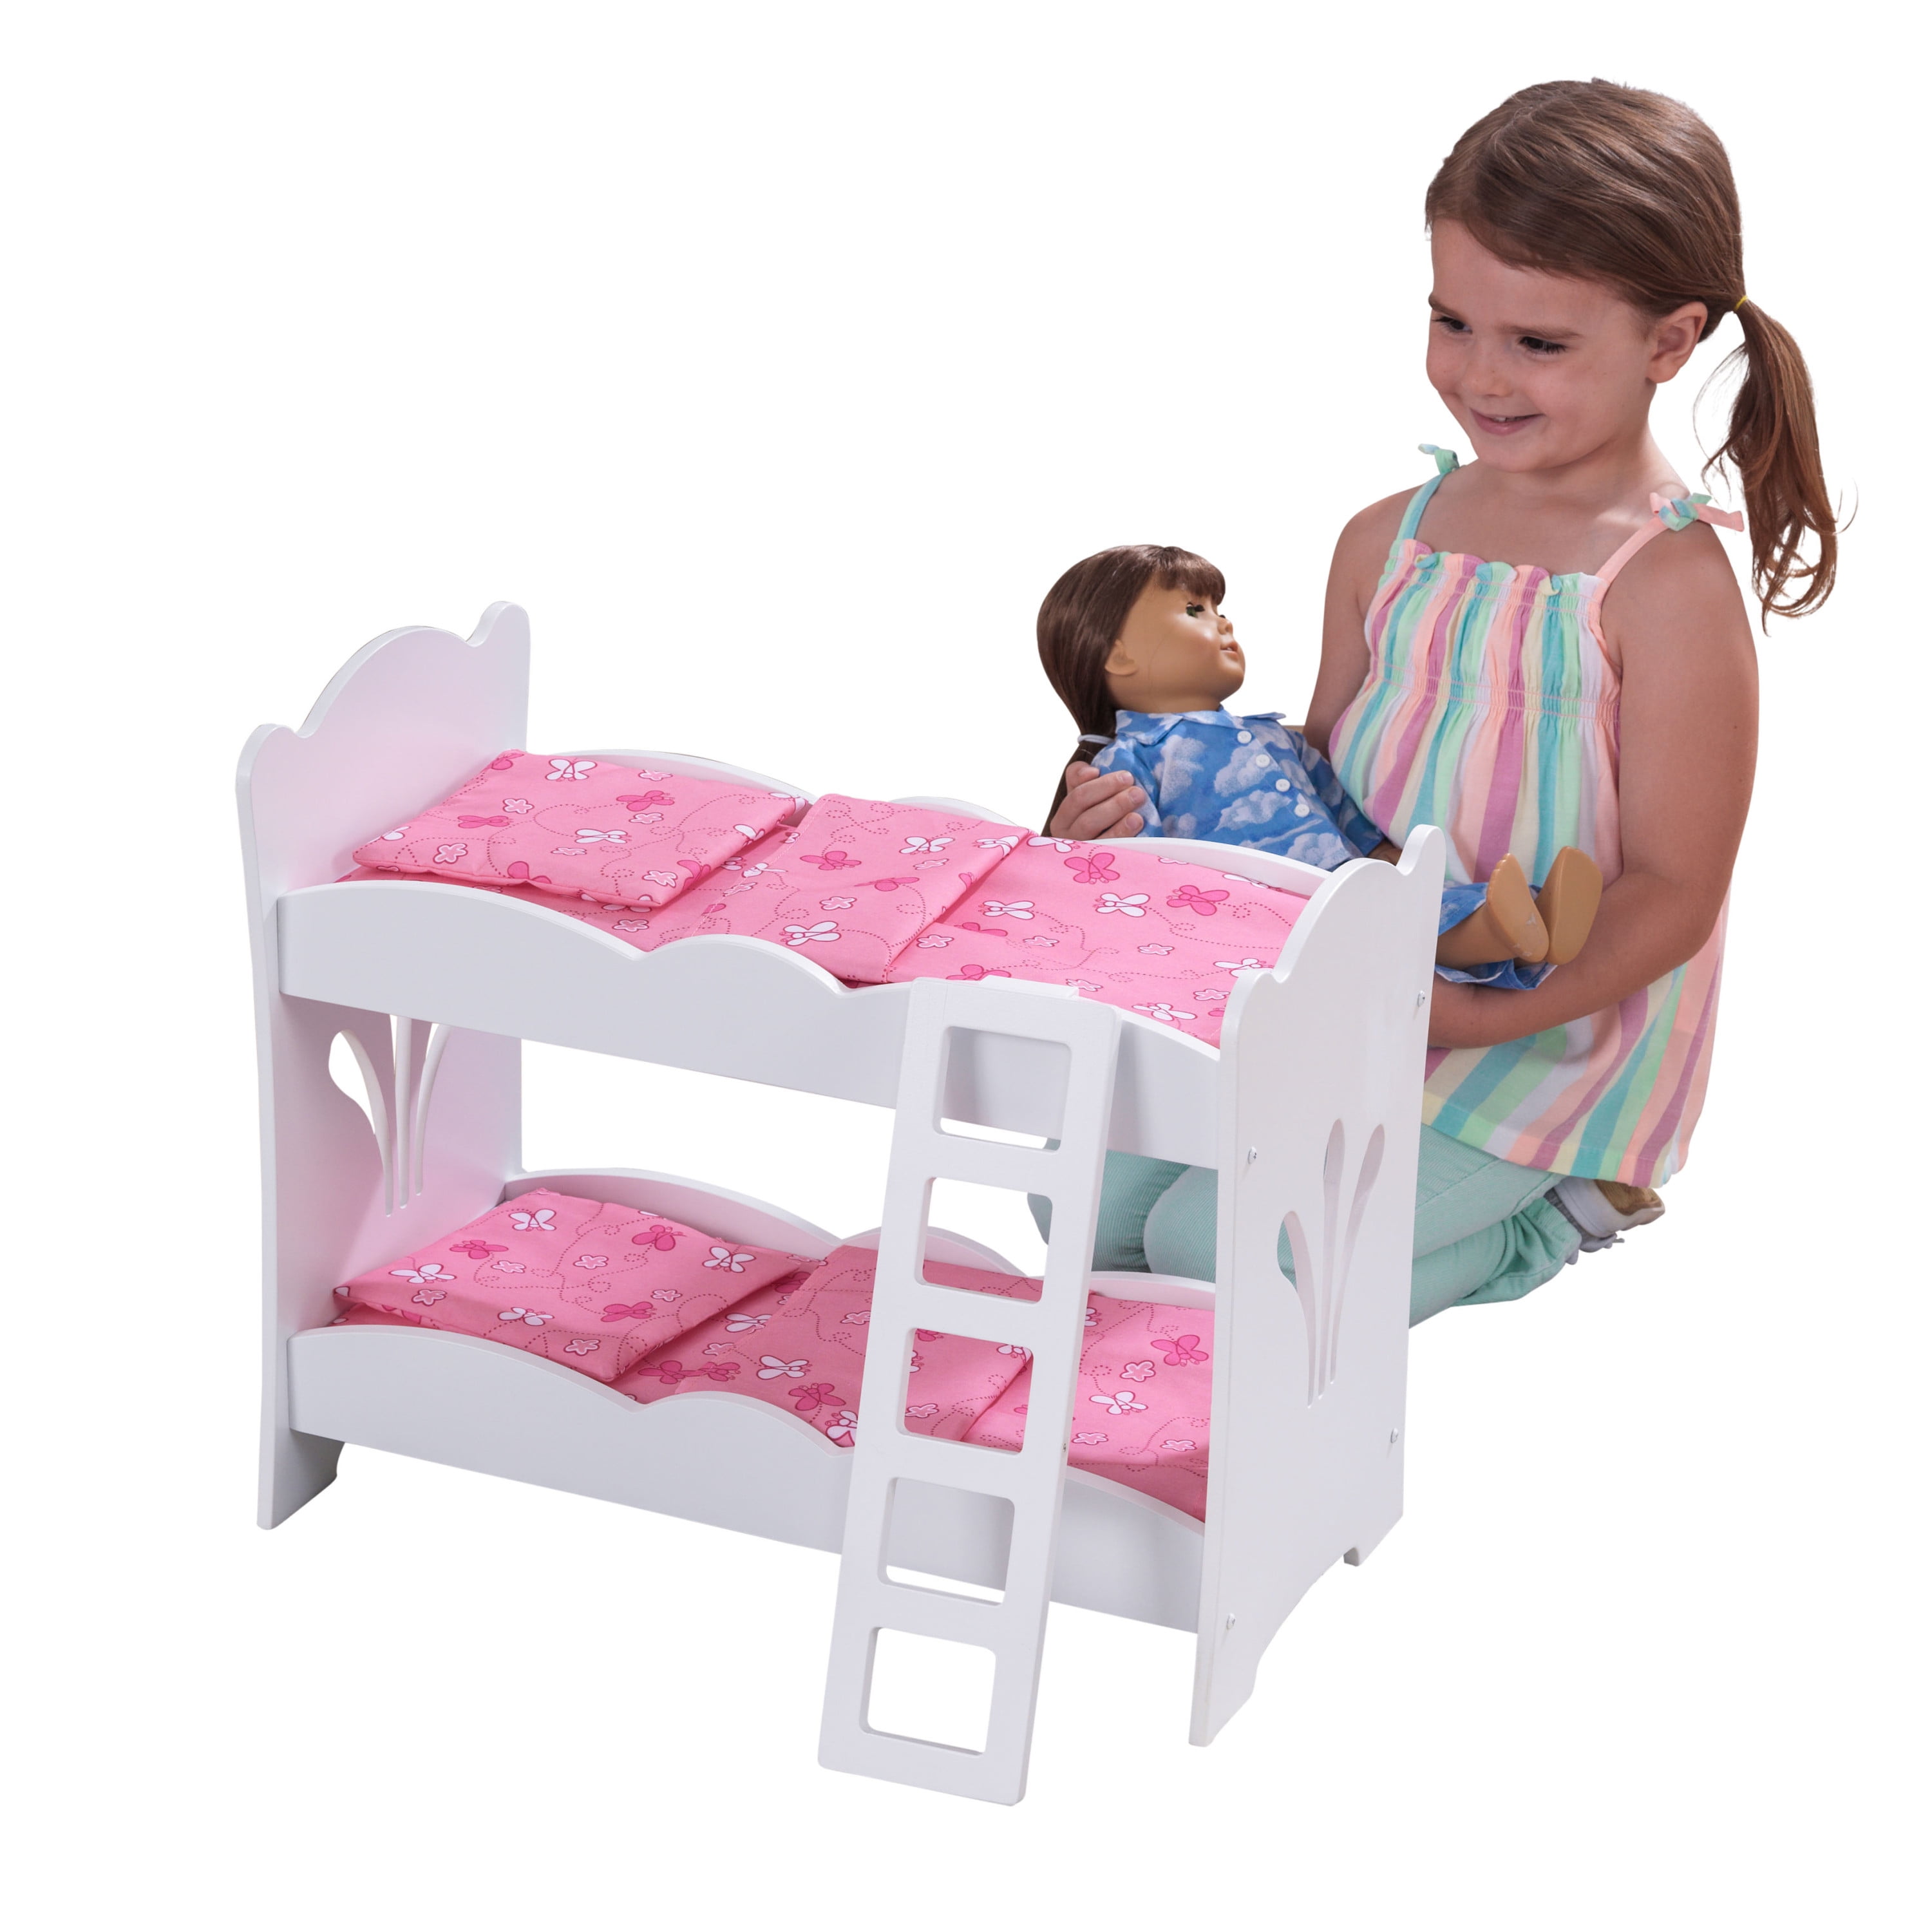 Kidkraft Wooden Lil Doll Bunk Bed With, Vintage Wooden Doll Bunk Beds